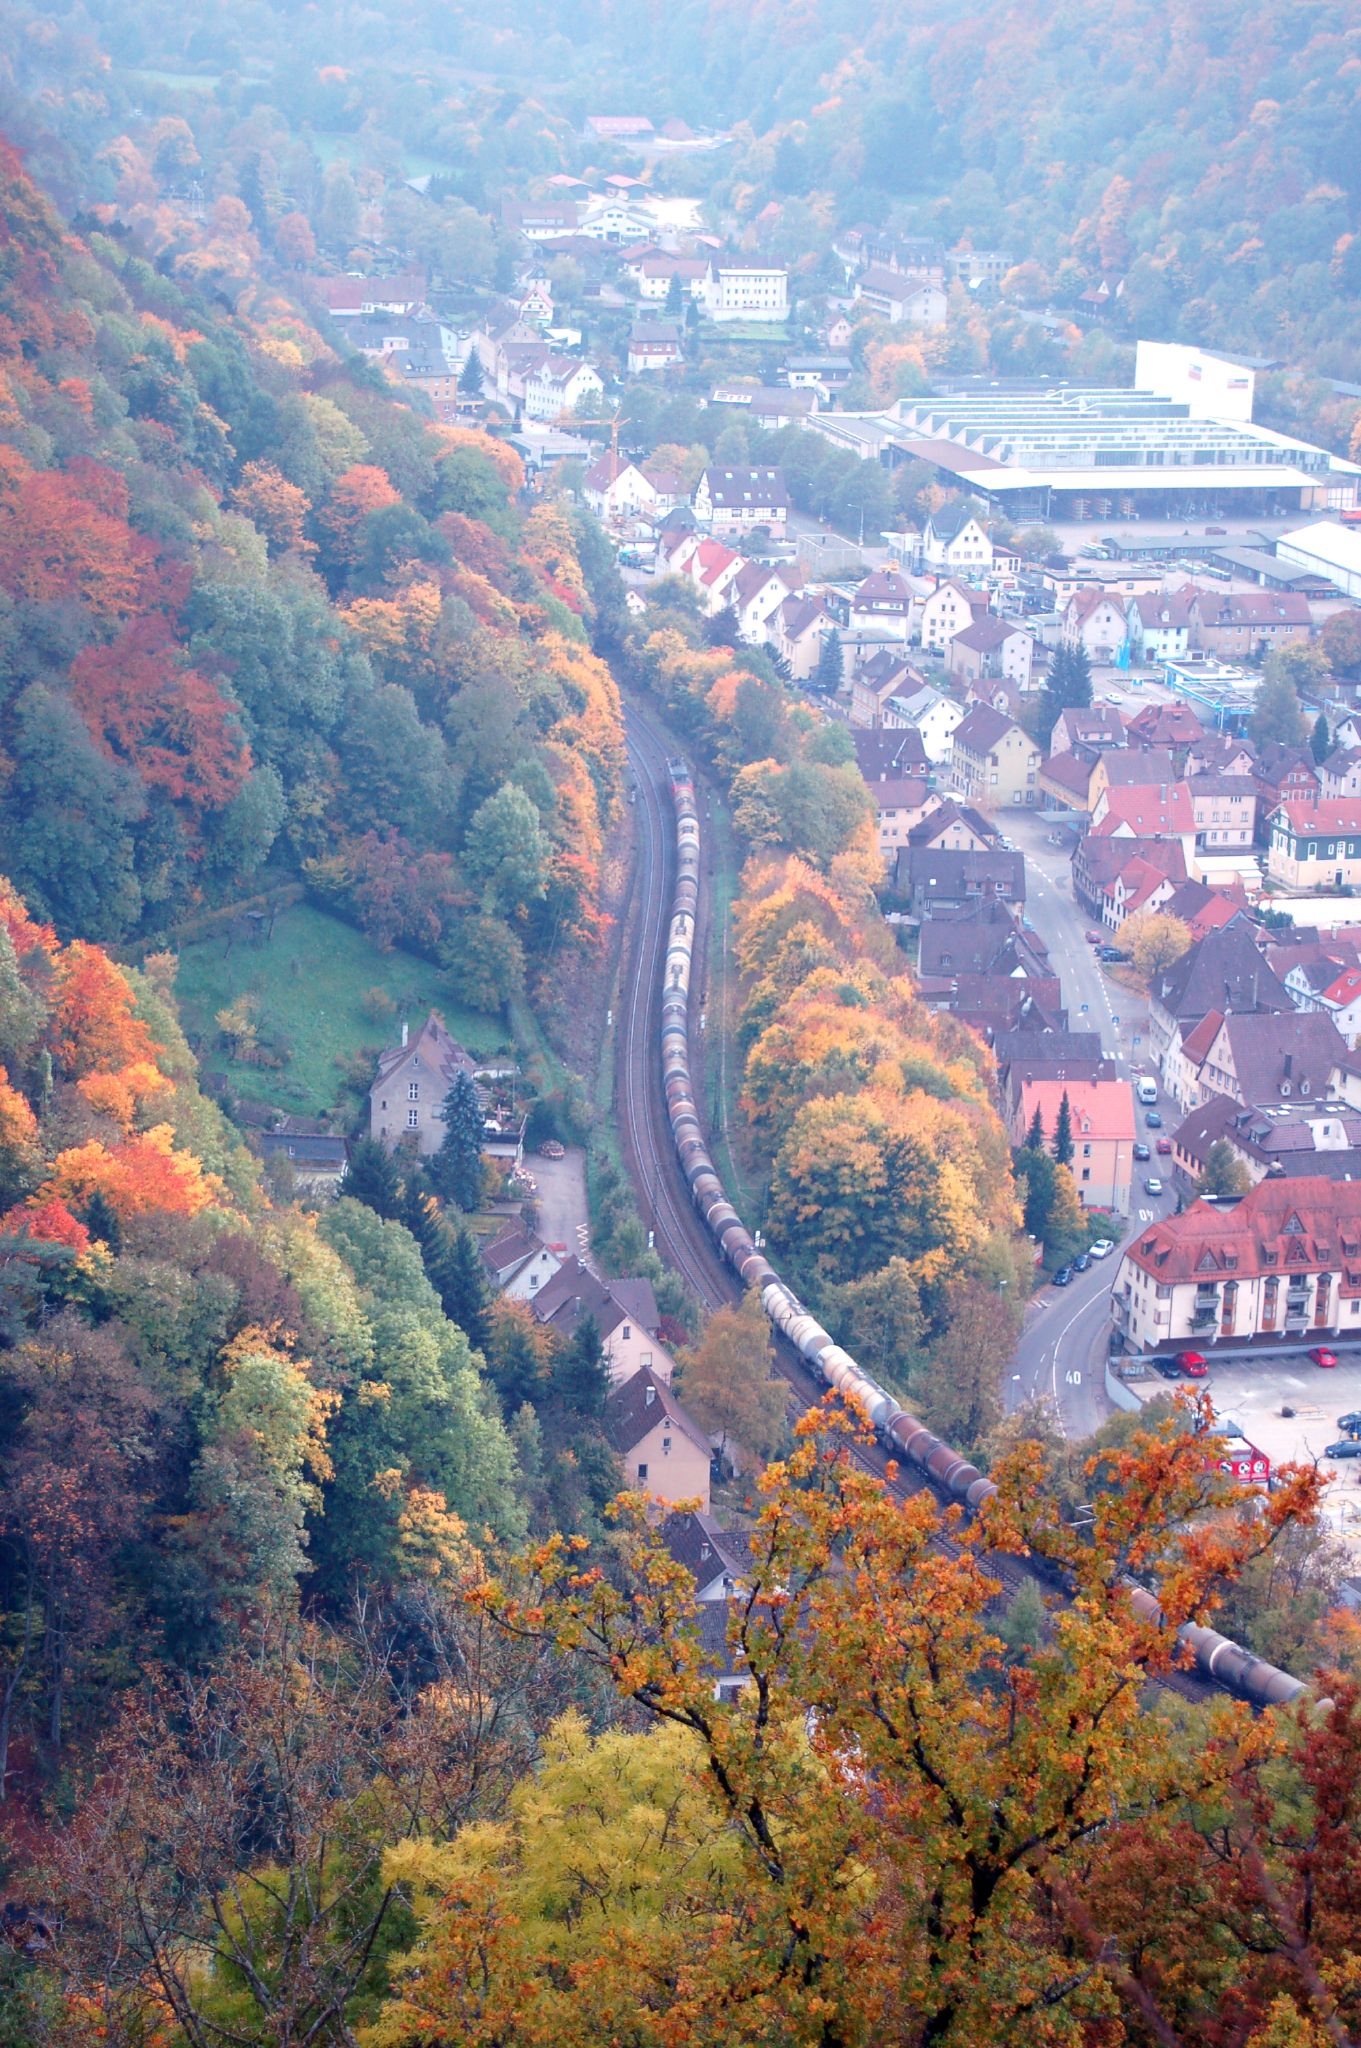 the town is nestled between a forest and mountains